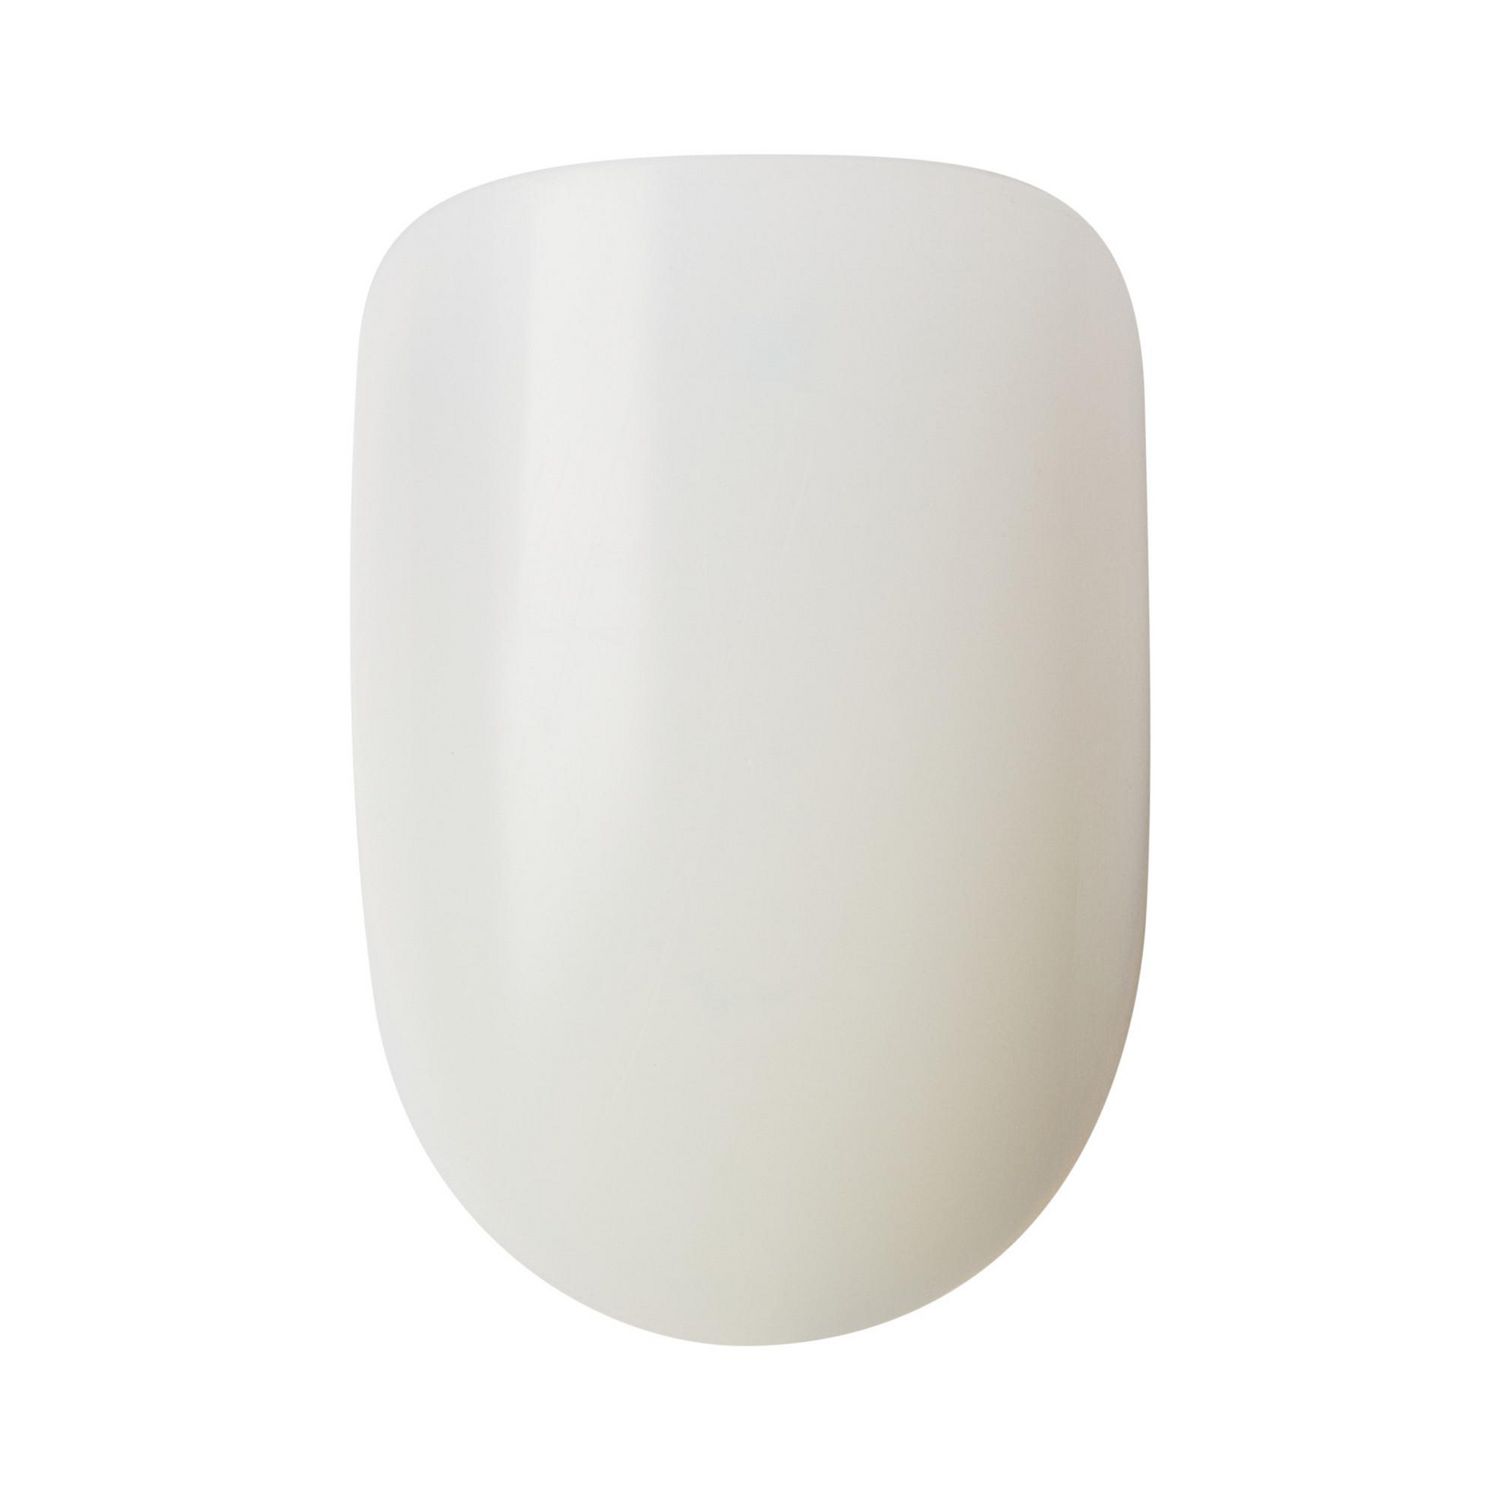 KISS 100 Acrylic Plain Full-Cover Nails (1 PACK, Coffin) : Beauty &  Personal Care - Amazon.com